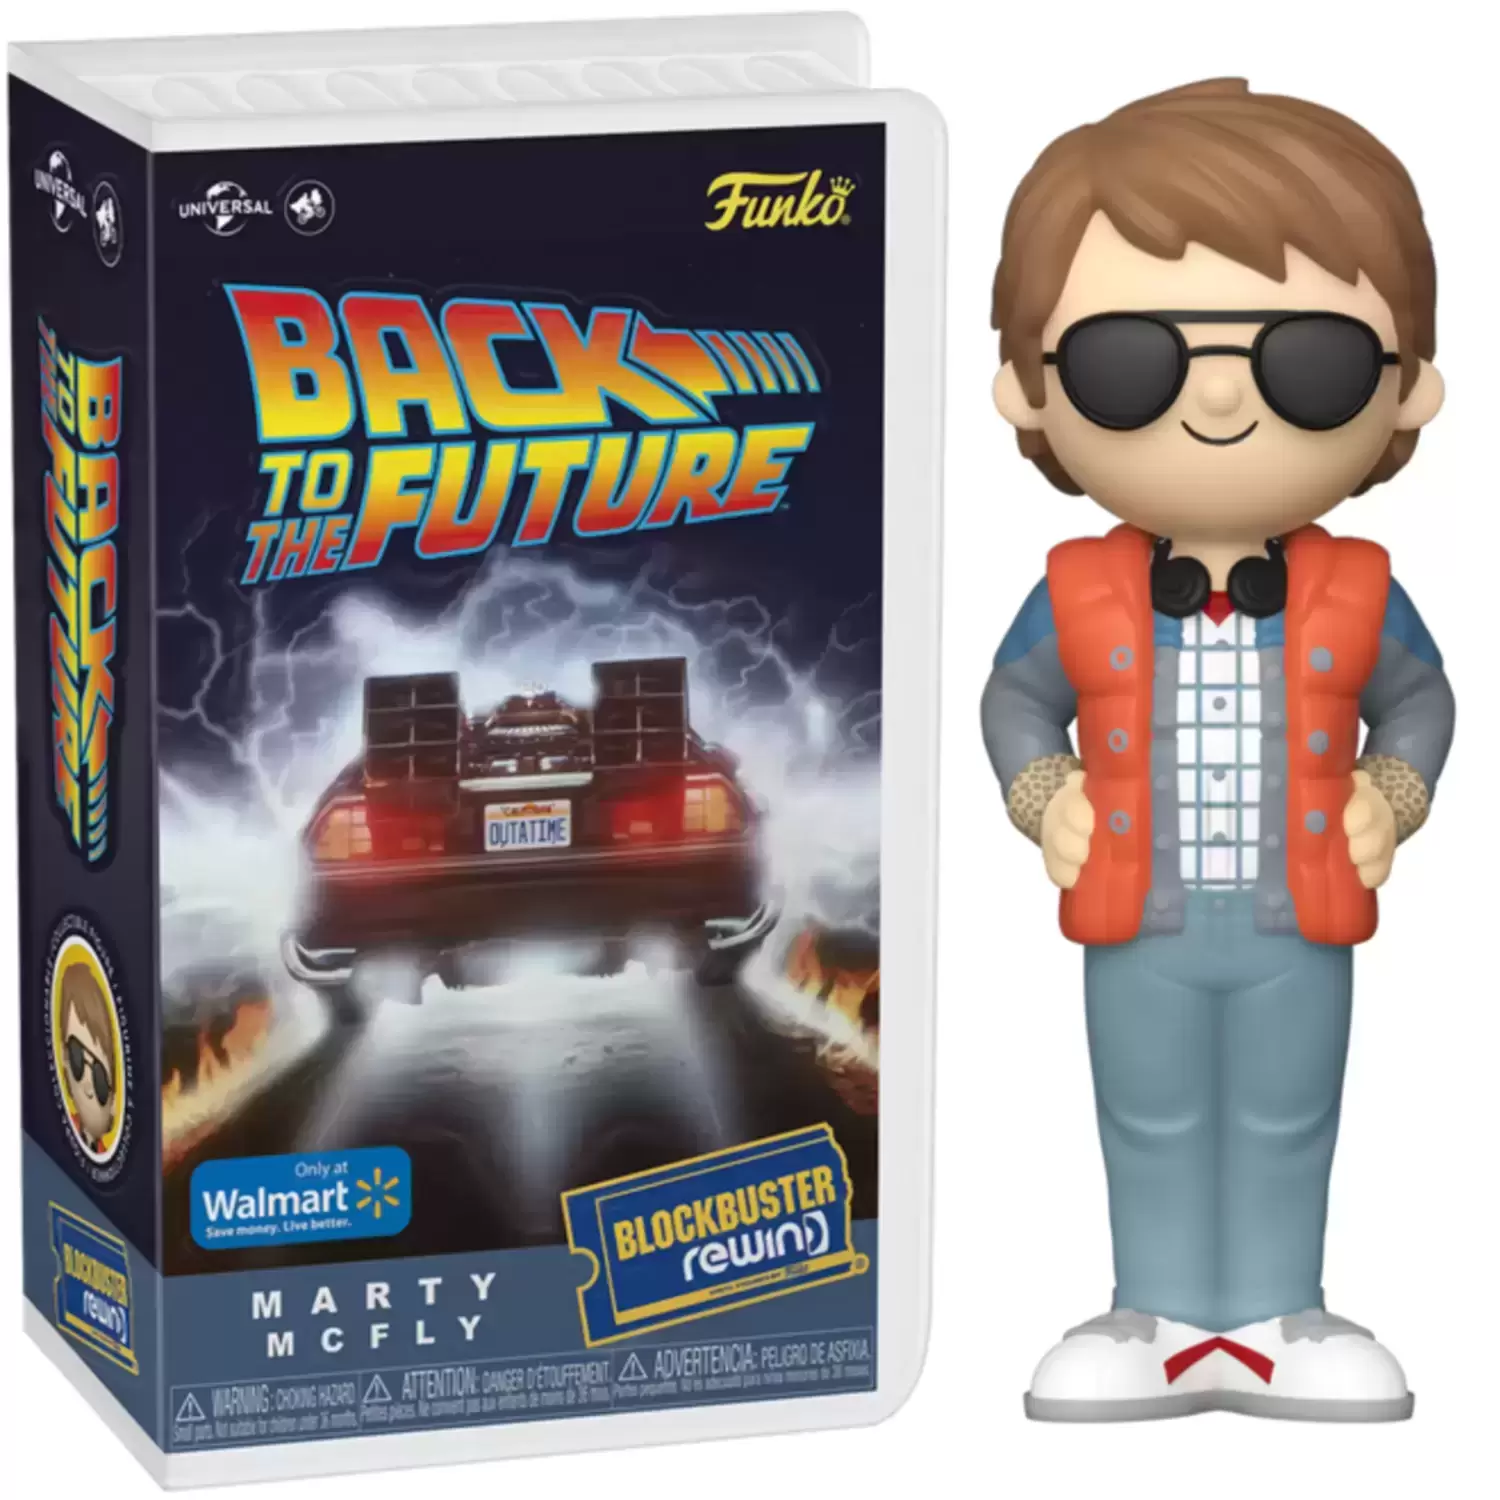 Blockbuster Rewind - Back to The Future - Marty McFly